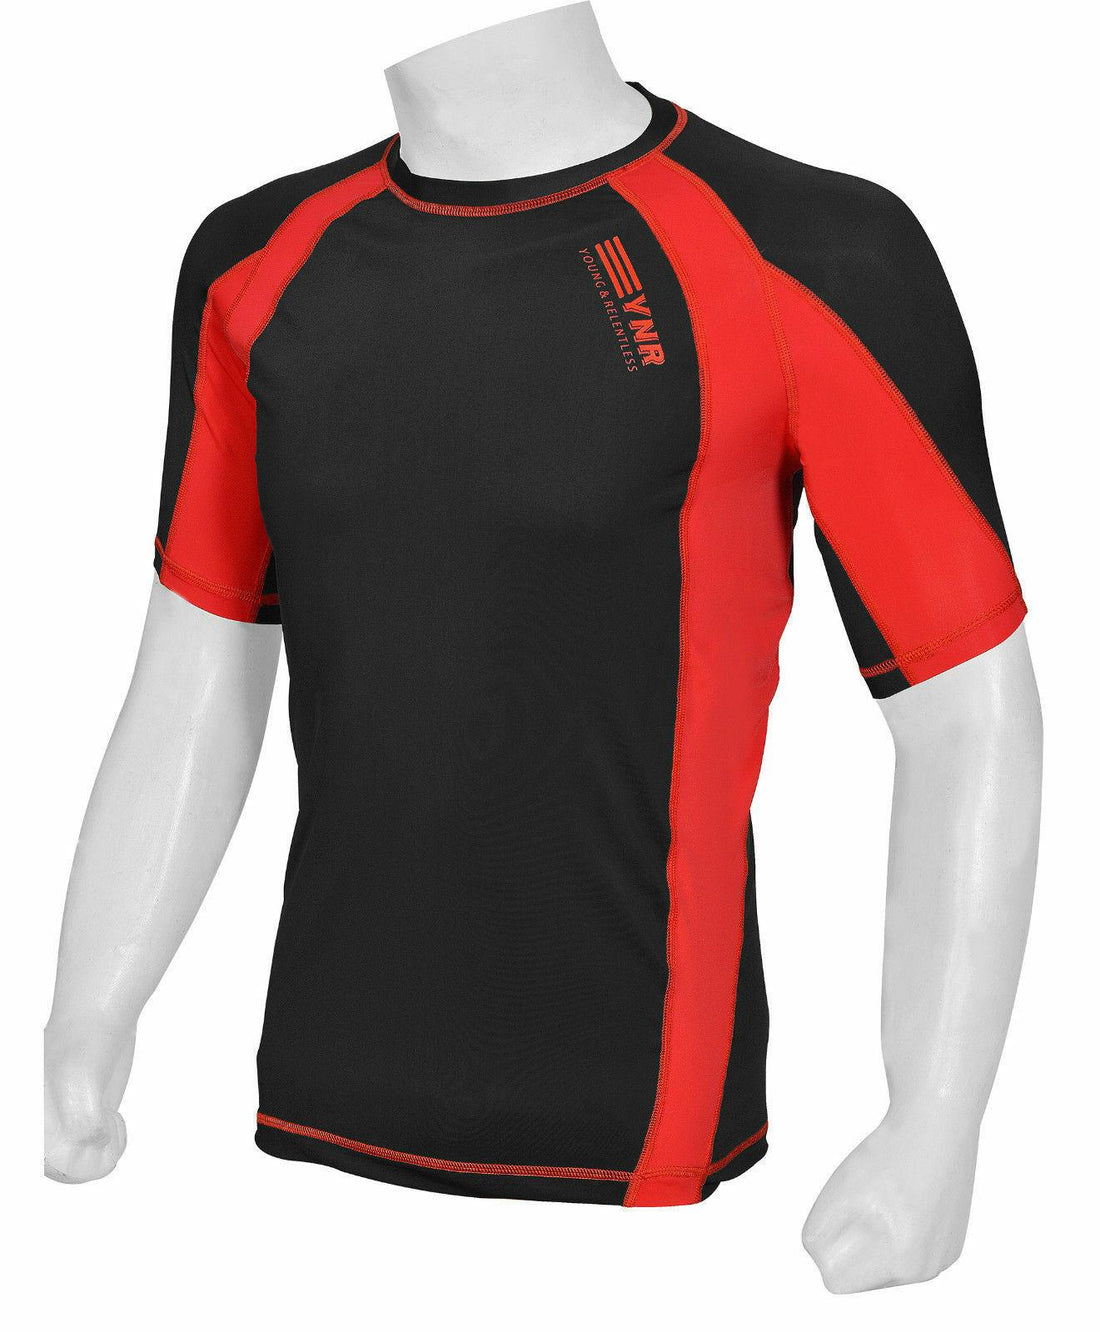 Men's Super Thermal Compression Armour Base Layer Cold Wear Top